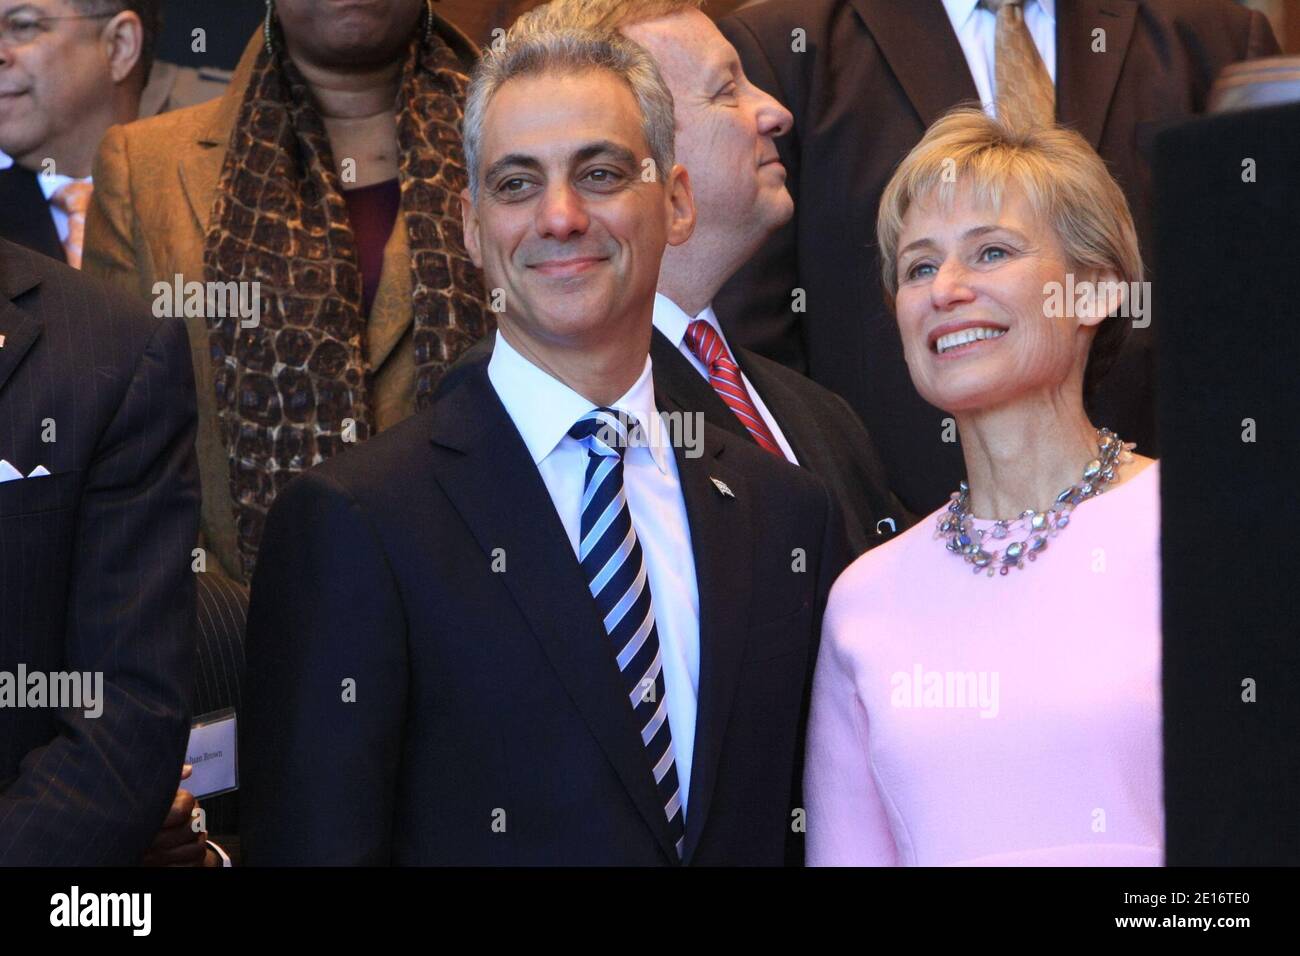 Mayor-elect Rahm Emanuel and his wife Amy Rule Emanuel, during the swearing-in ceremony at Millenium Park in Chicago, Illinois on May 16, 2011. Photo by Alexandra Buxbaum/ABACAPRESS.COM Stock Photo